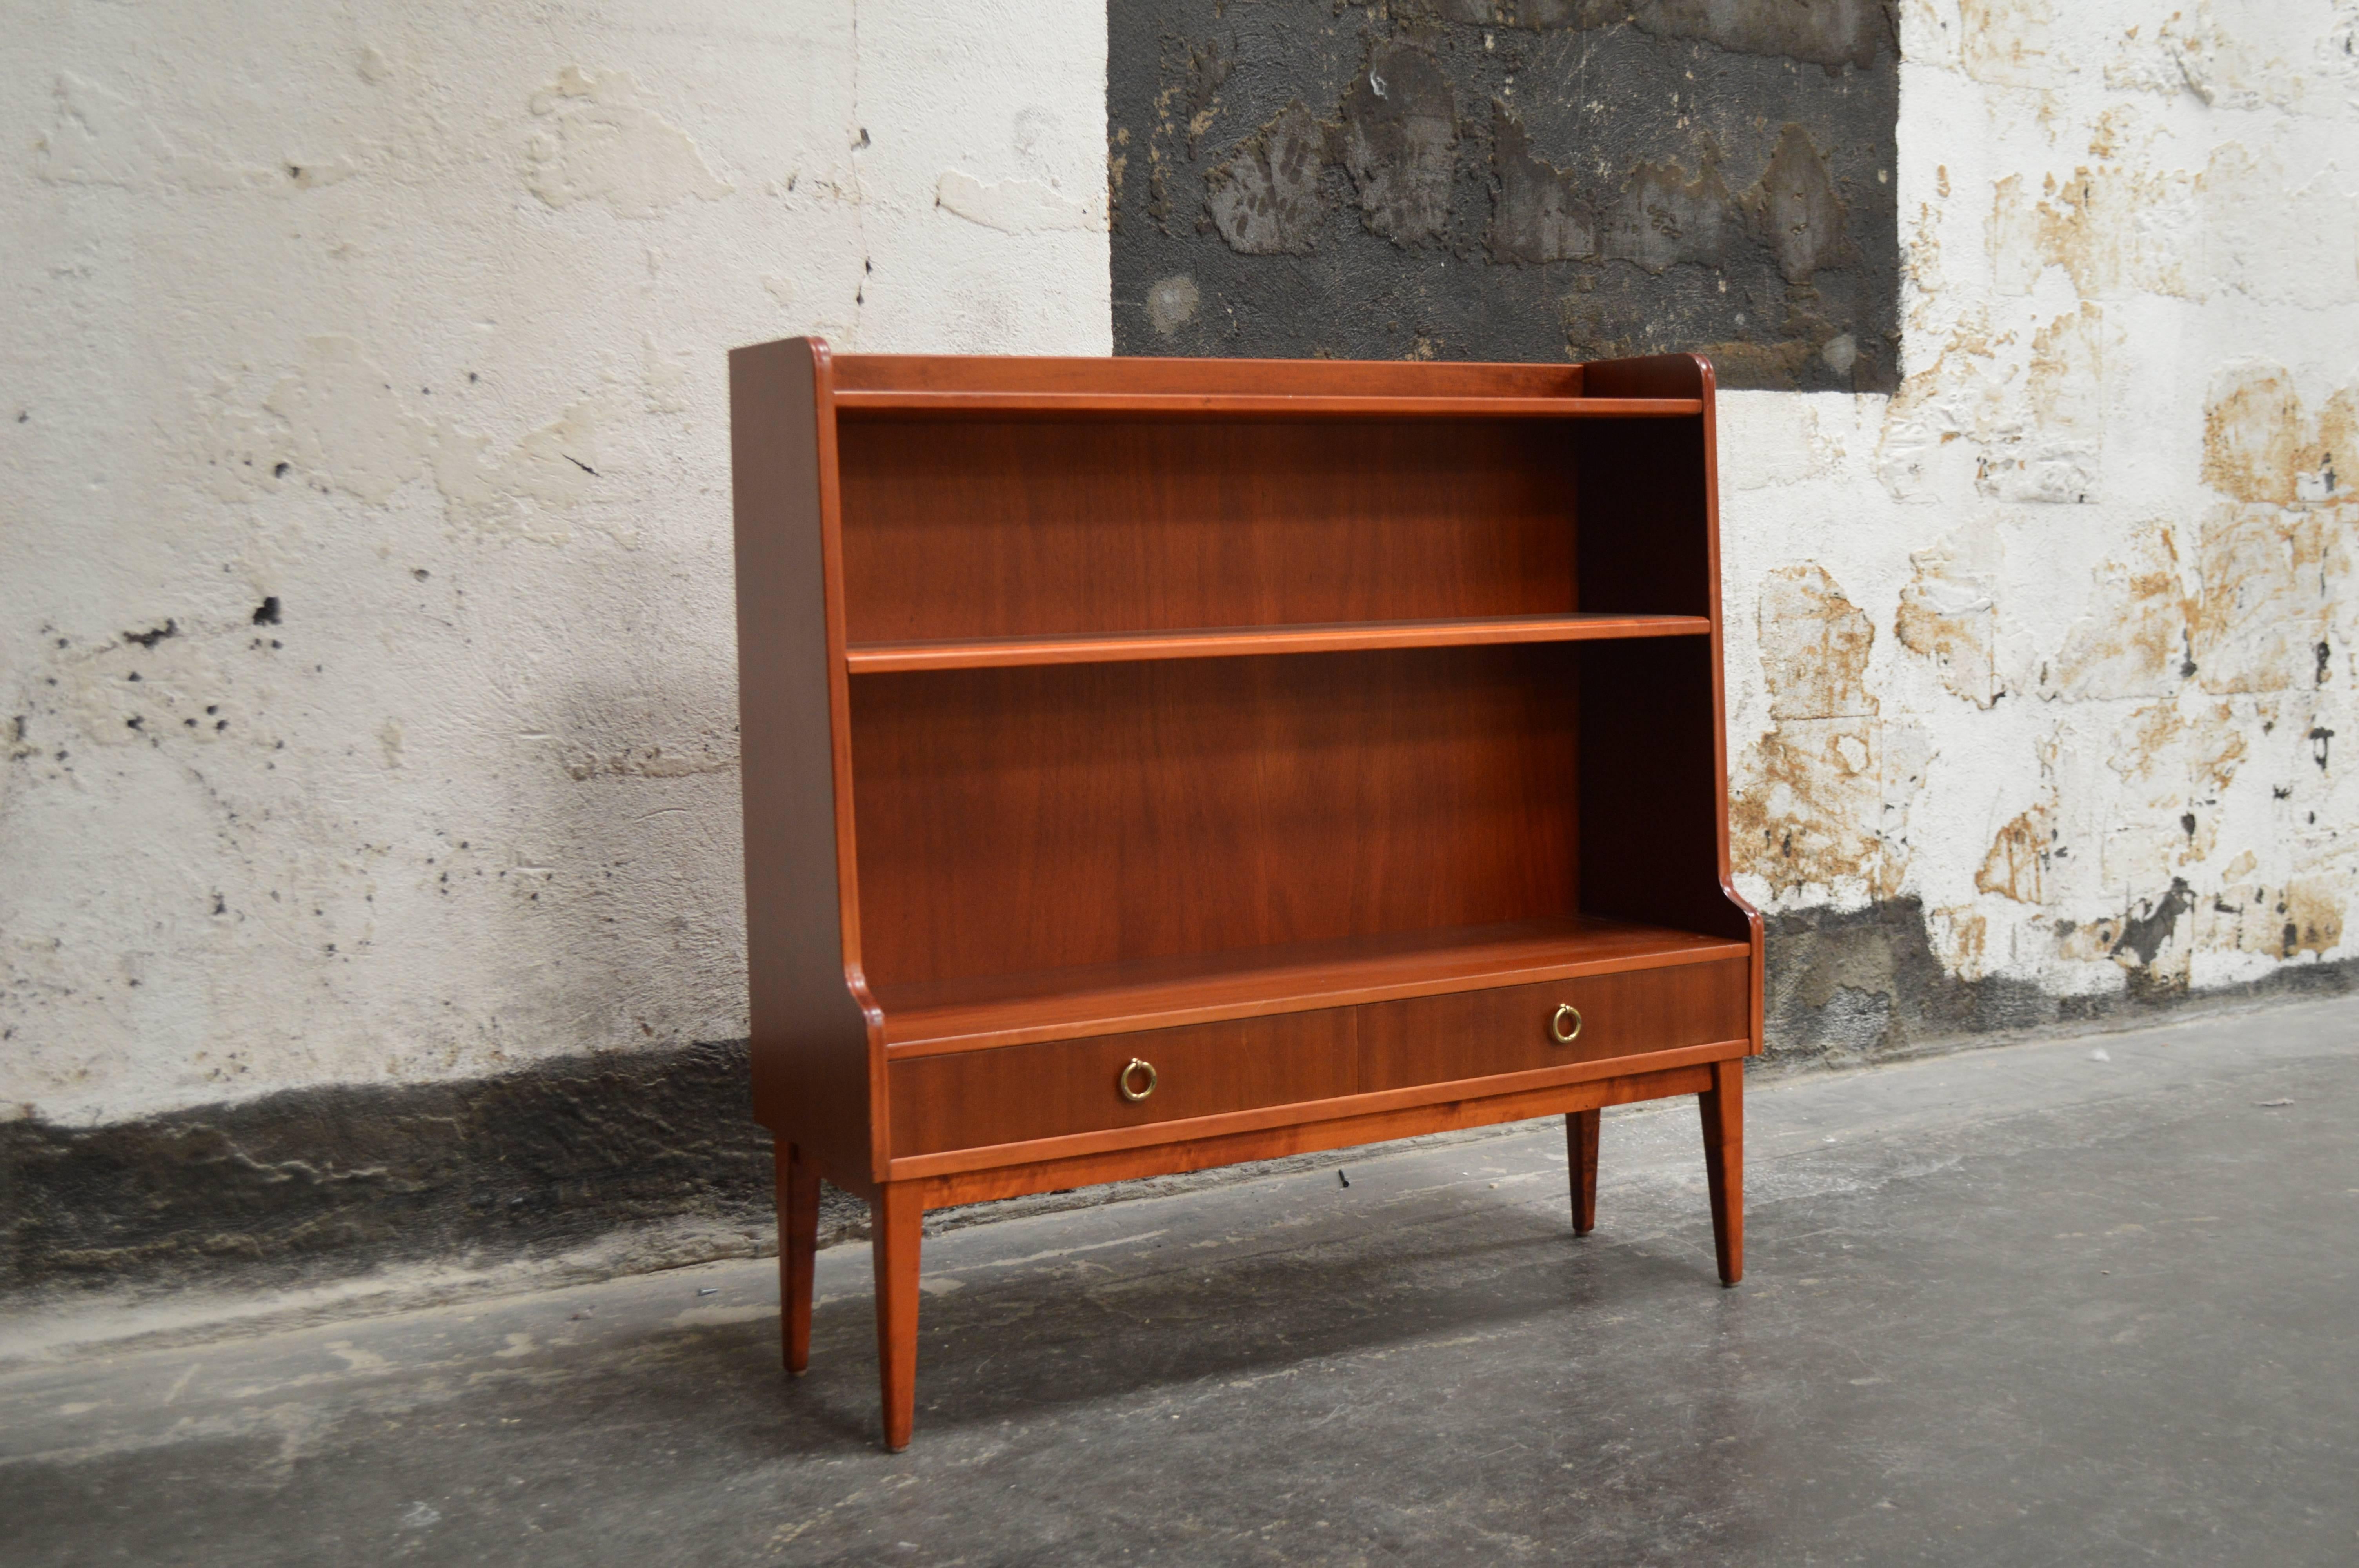 This exceptional Mid-Century bar or bookcase features open shelving for display of barware or accessories, the lower half has two drawers with original brass ring pulls. This petite piece packs a lot of punch and is perfect for any small space.